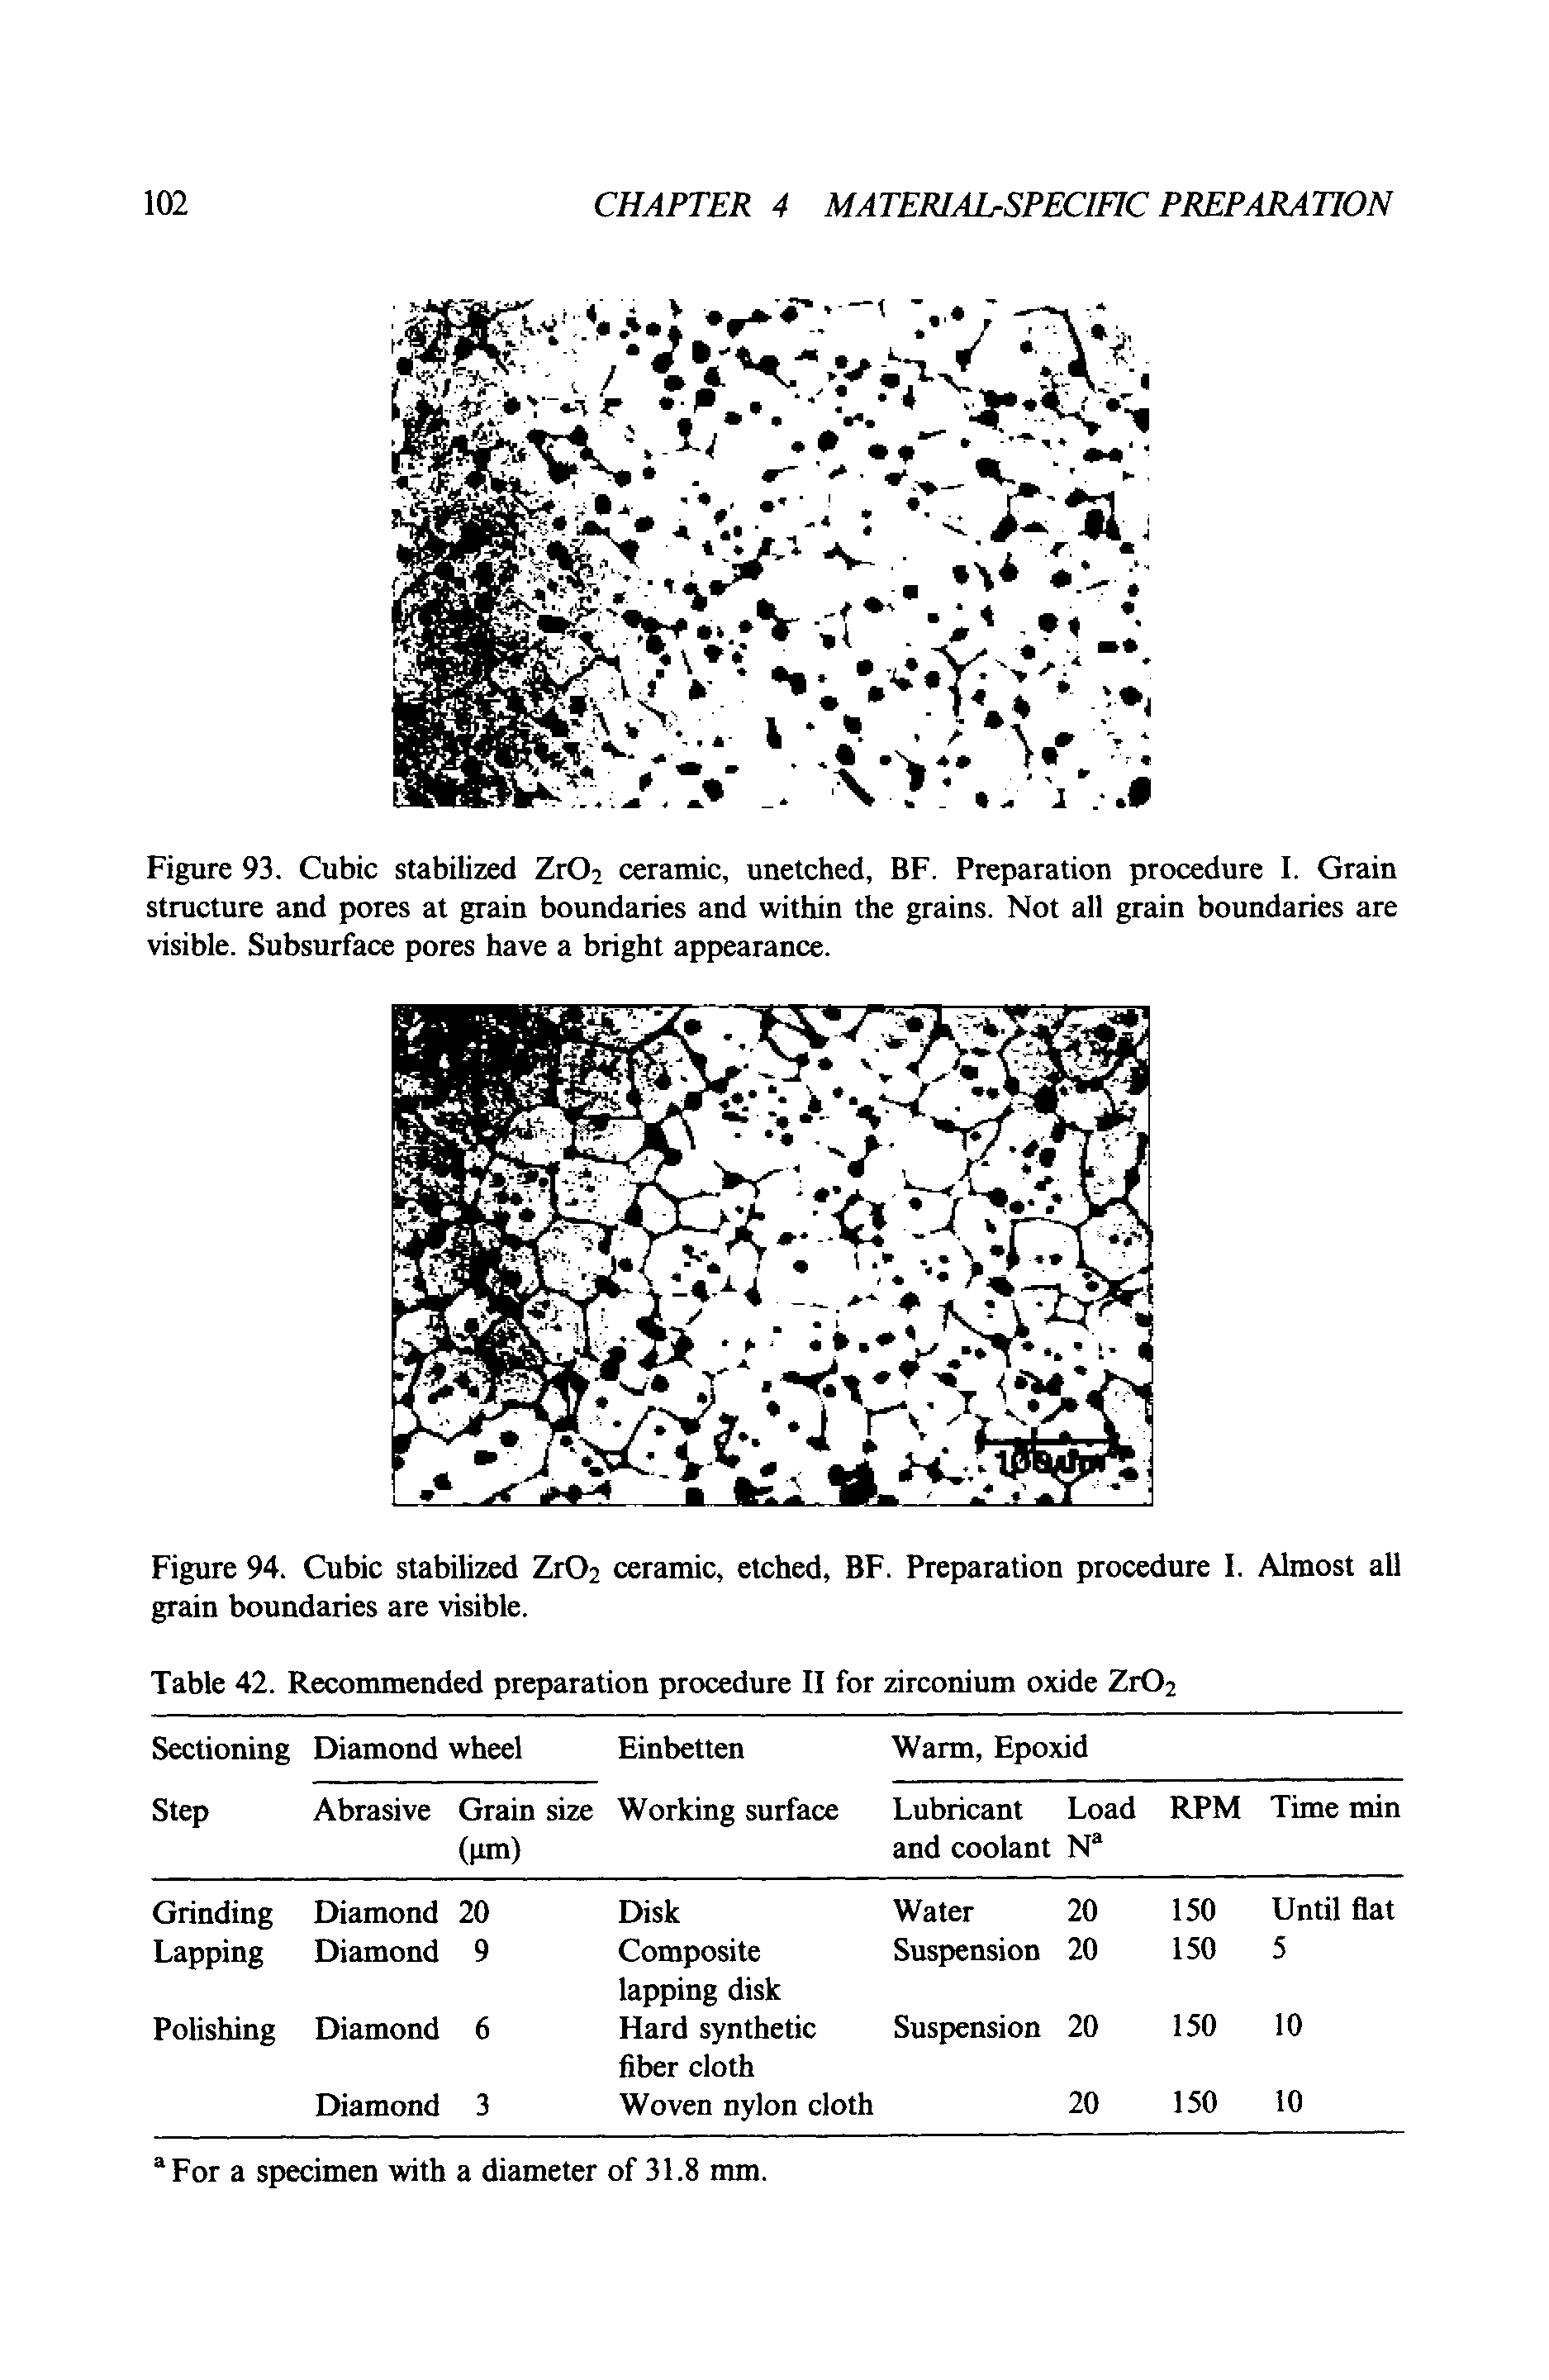 Figure 93. Cubic stabilized ZrOi ceramic, unetched, BF. Preparation procedure I. Grain structure and pores at grain boundaries and within the grains. Not all grain boundaries are visible. Subsurface pores have a bright appearance.